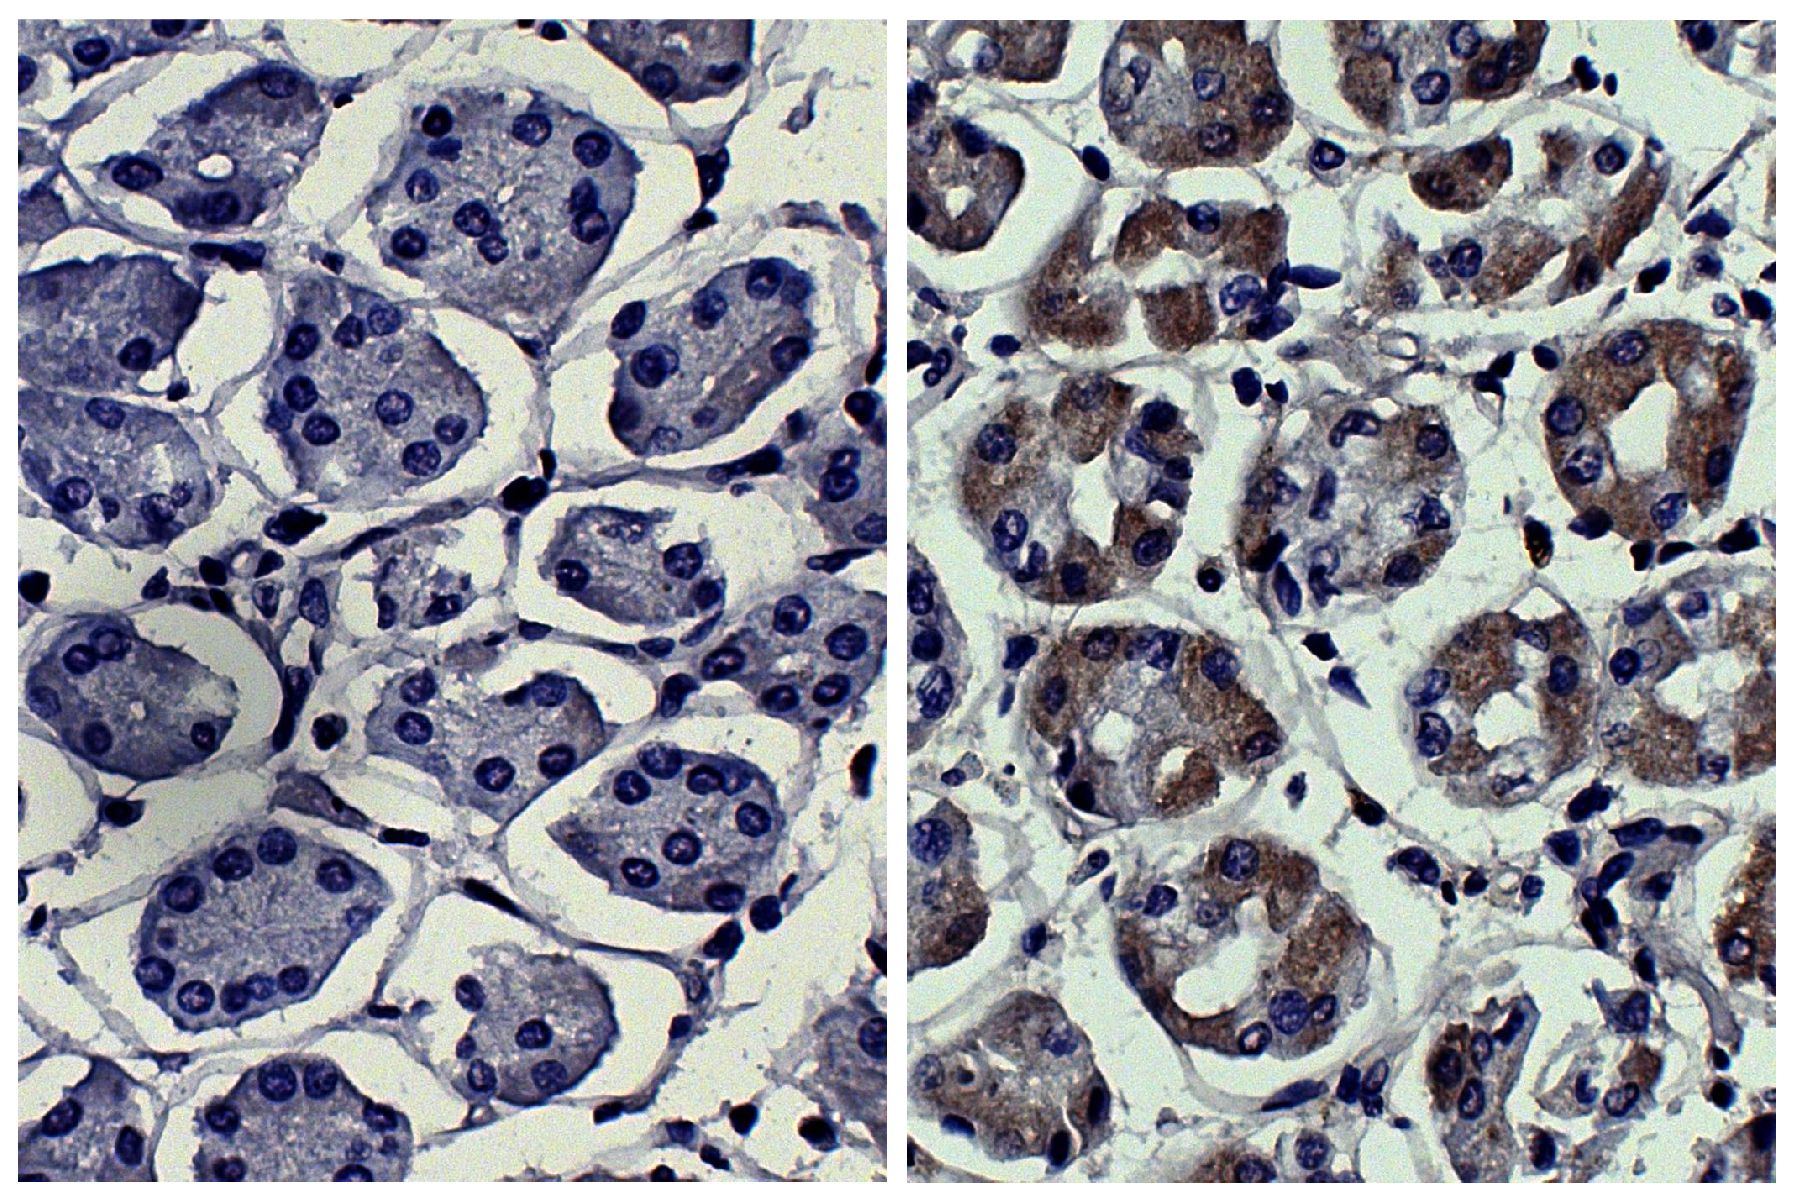 Paraffin embedded human kidney cancer tissue was stained with Mouse IgG<sub>2a</sub>-UNLB isotype control (SB Cat. No. 0103-01; left) and Mouse Anti-Human MMP-3-UNLB (SB Cat. No. 12020-01; right) followed by Goat Anti-Mouse IgG<sub>2a</sub>, Human ads-HRP (SB Cat. No. 1080-05), DAB, and hematoxylin.